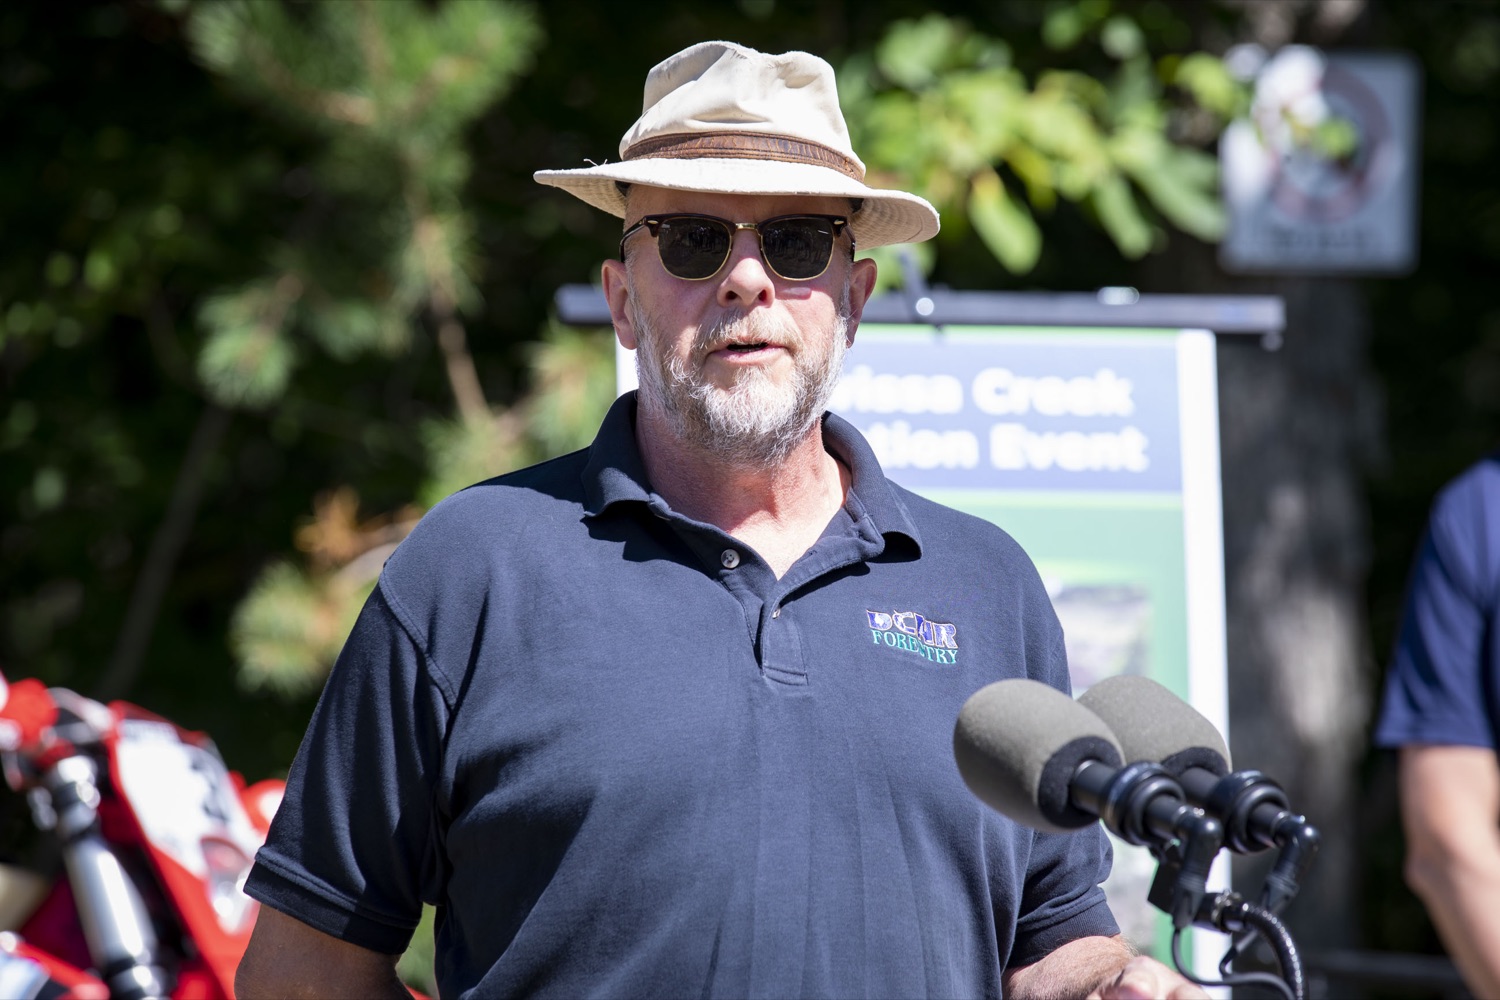 Weiser District Forester Tim Ladner discusses the acquisition of a 5,600-acre tract of land that will be developed into a new motorized recreation area, in McAdoo, PA on August 12, 2022.<br><a href="https://filesource.amperwave.net/commonwealthofpa/photo/22090_dcnr_RecreationArea_14.jpg" target="_blank">⇣ Download Photo</a>